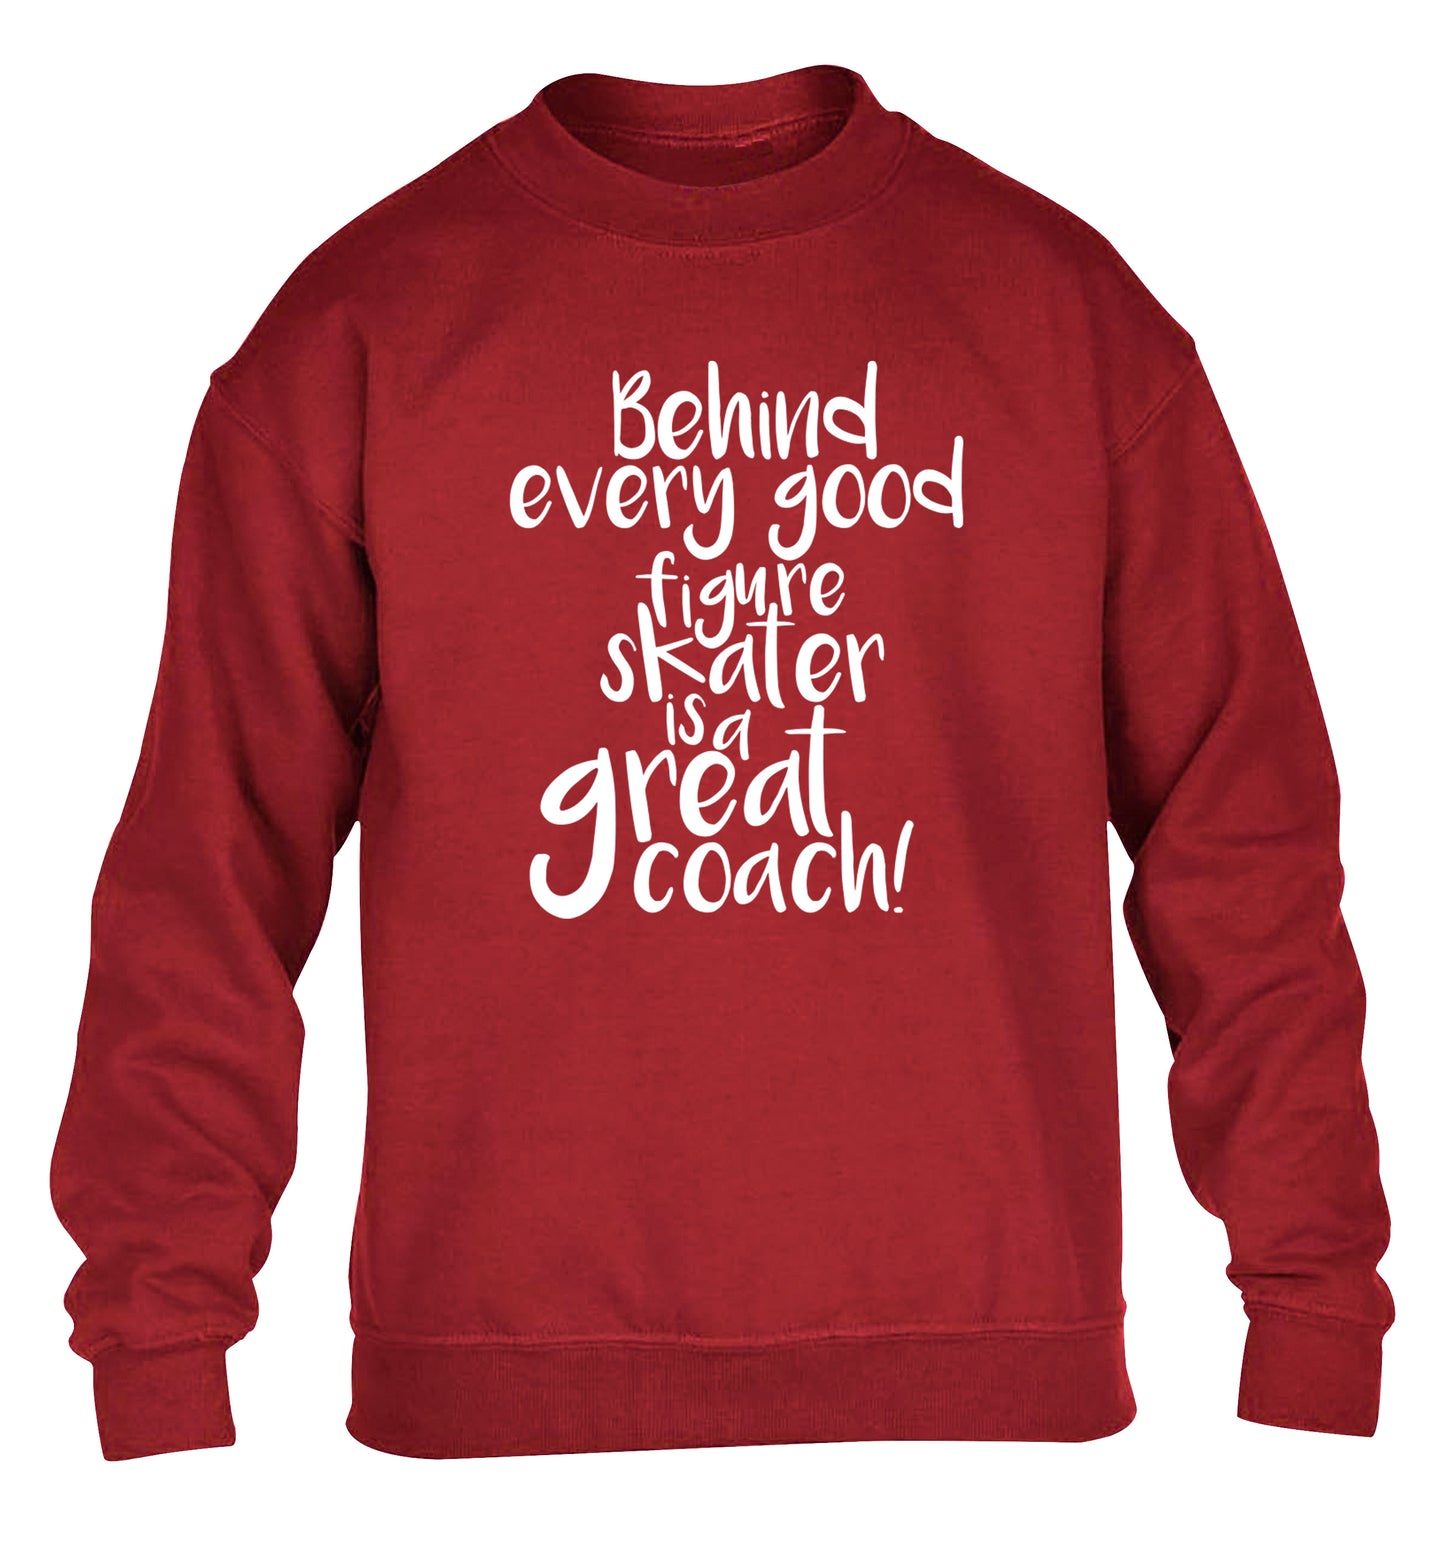 Behind every good figure skater is a great coach children's grey sweater 12-14 Years